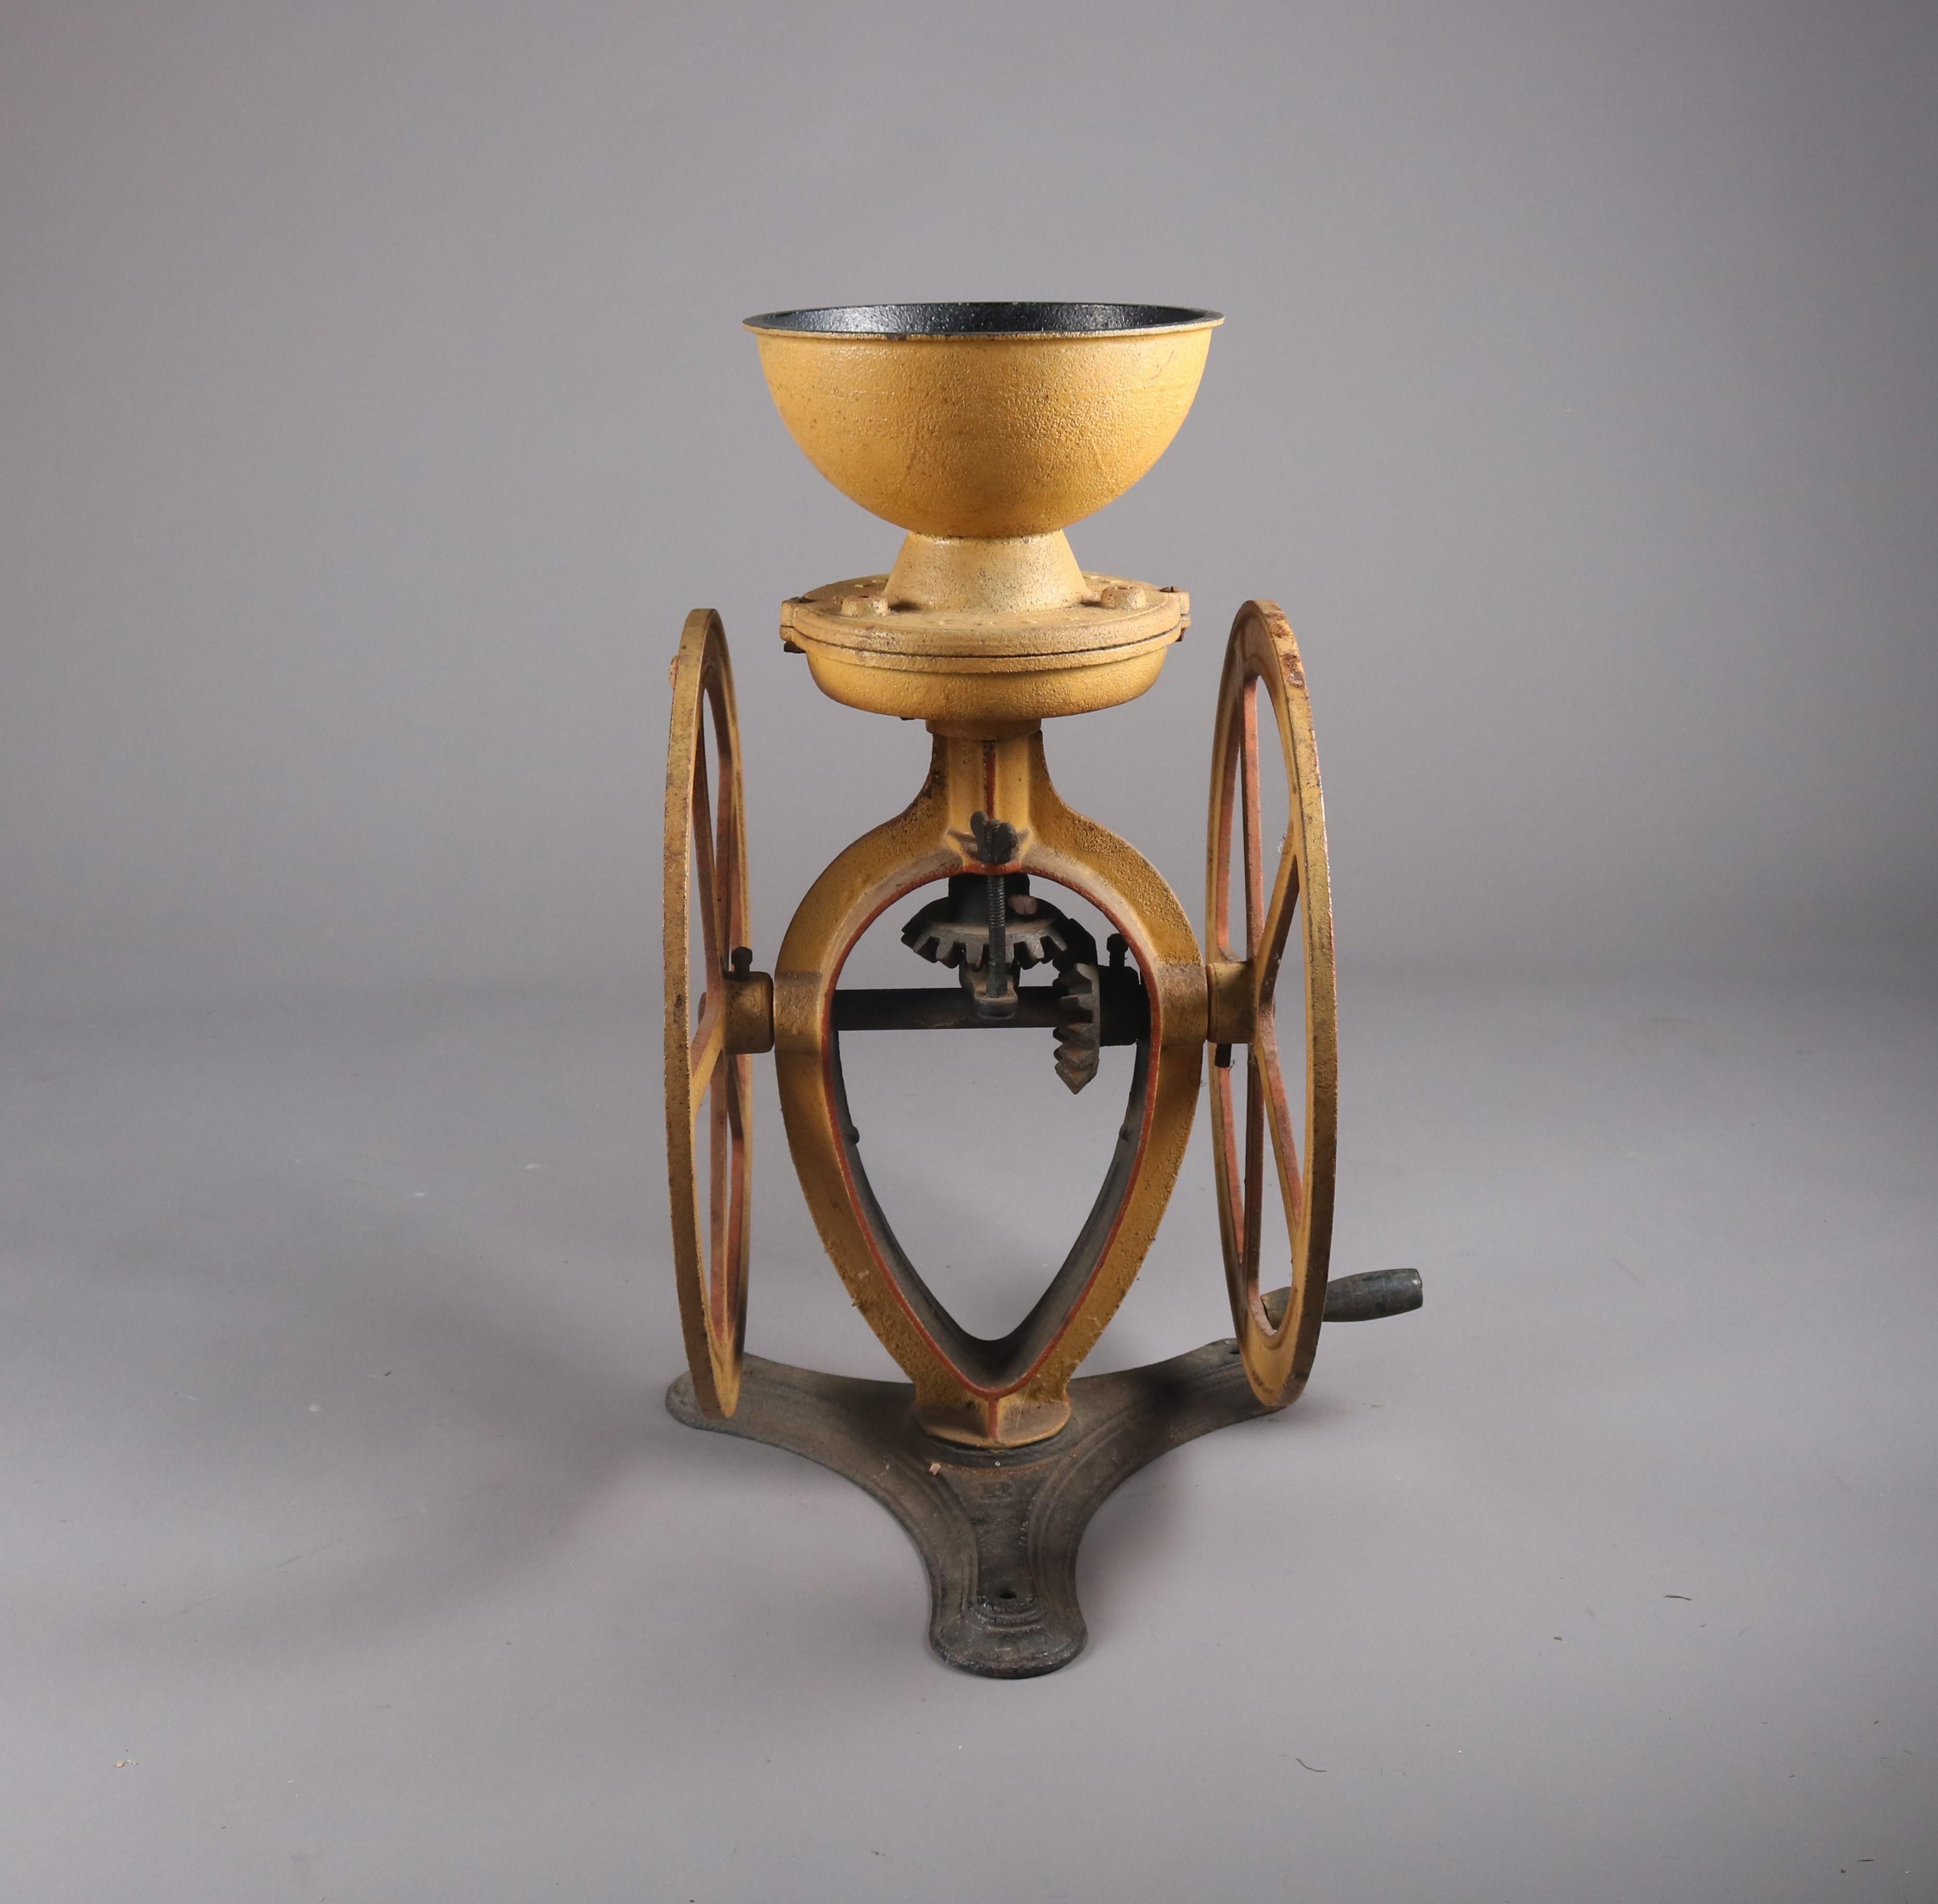 Antique cast iron countertop coffee grinder by Lane Brothers features old repaint, yellow with red, 19th century

Measures: 29.5